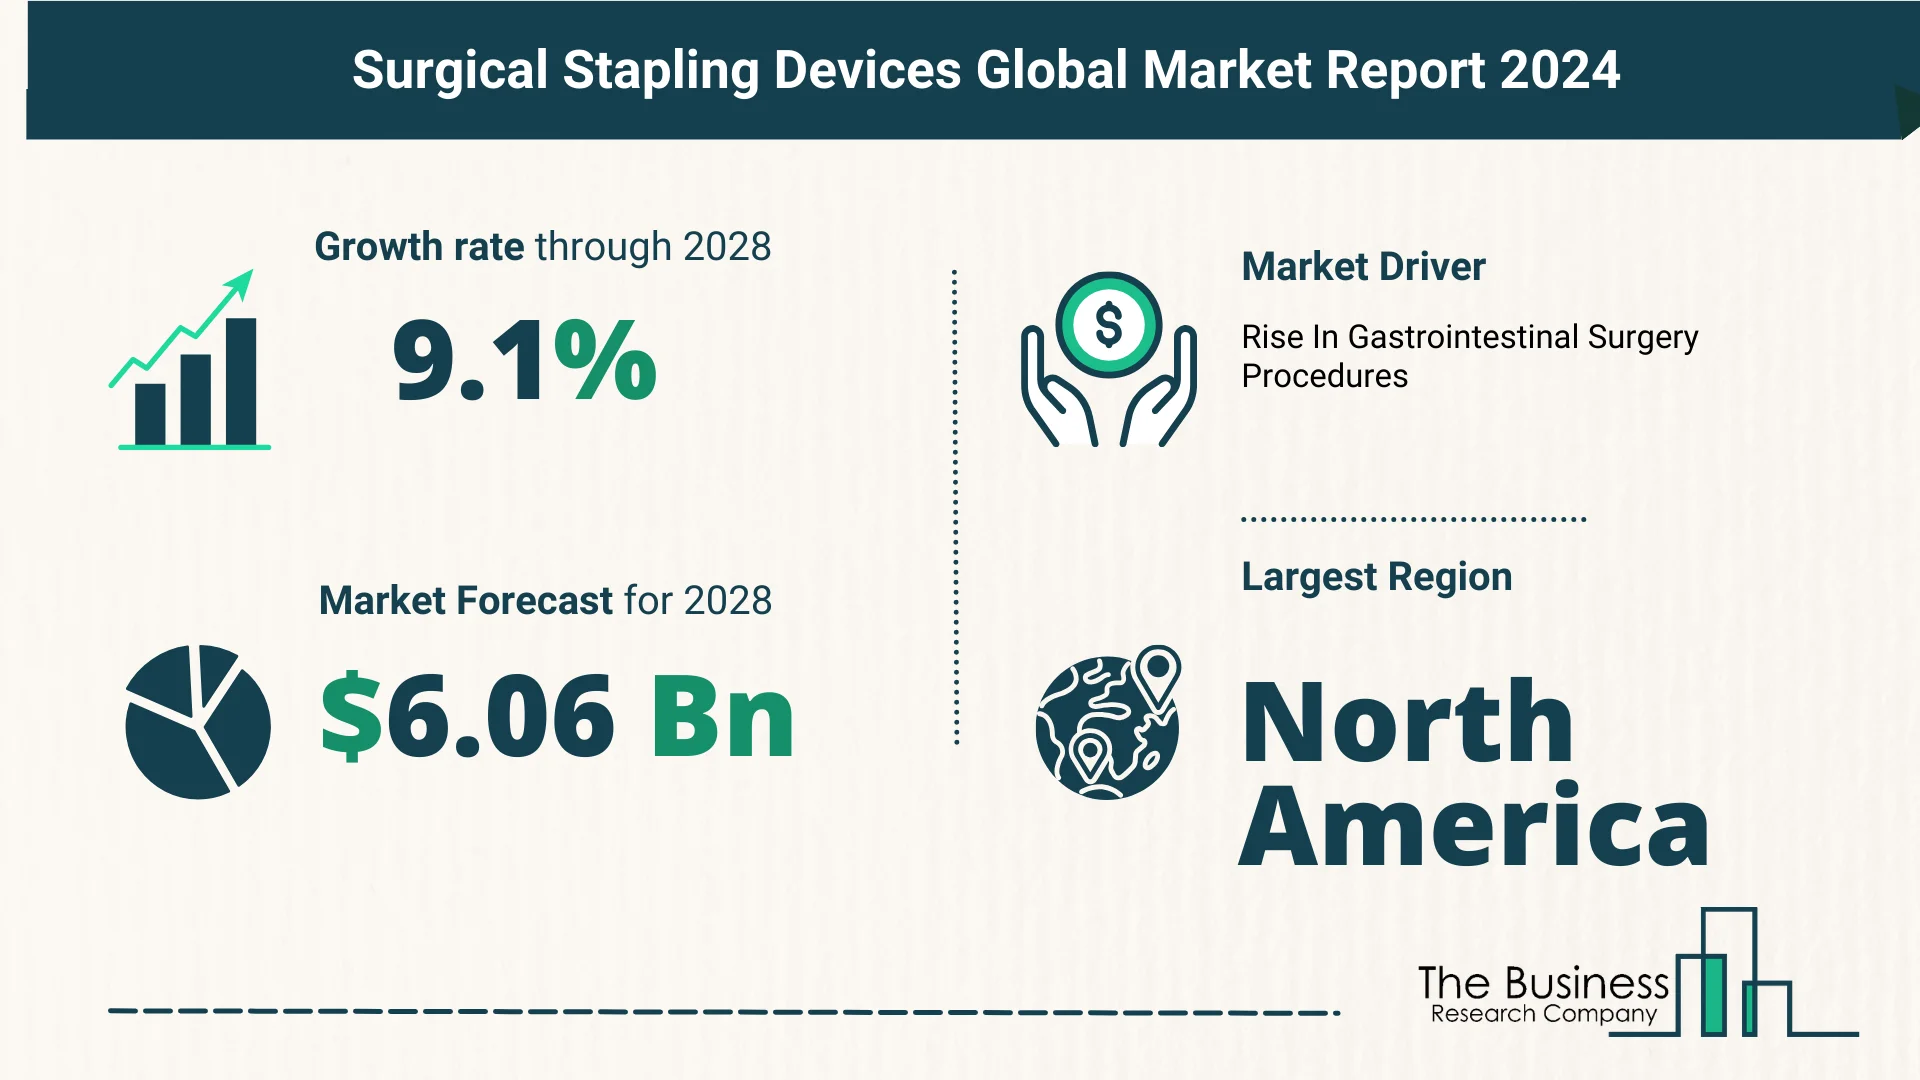 Key Takeaways From The Global Surgical Stapling Devices Market Forecast 2024